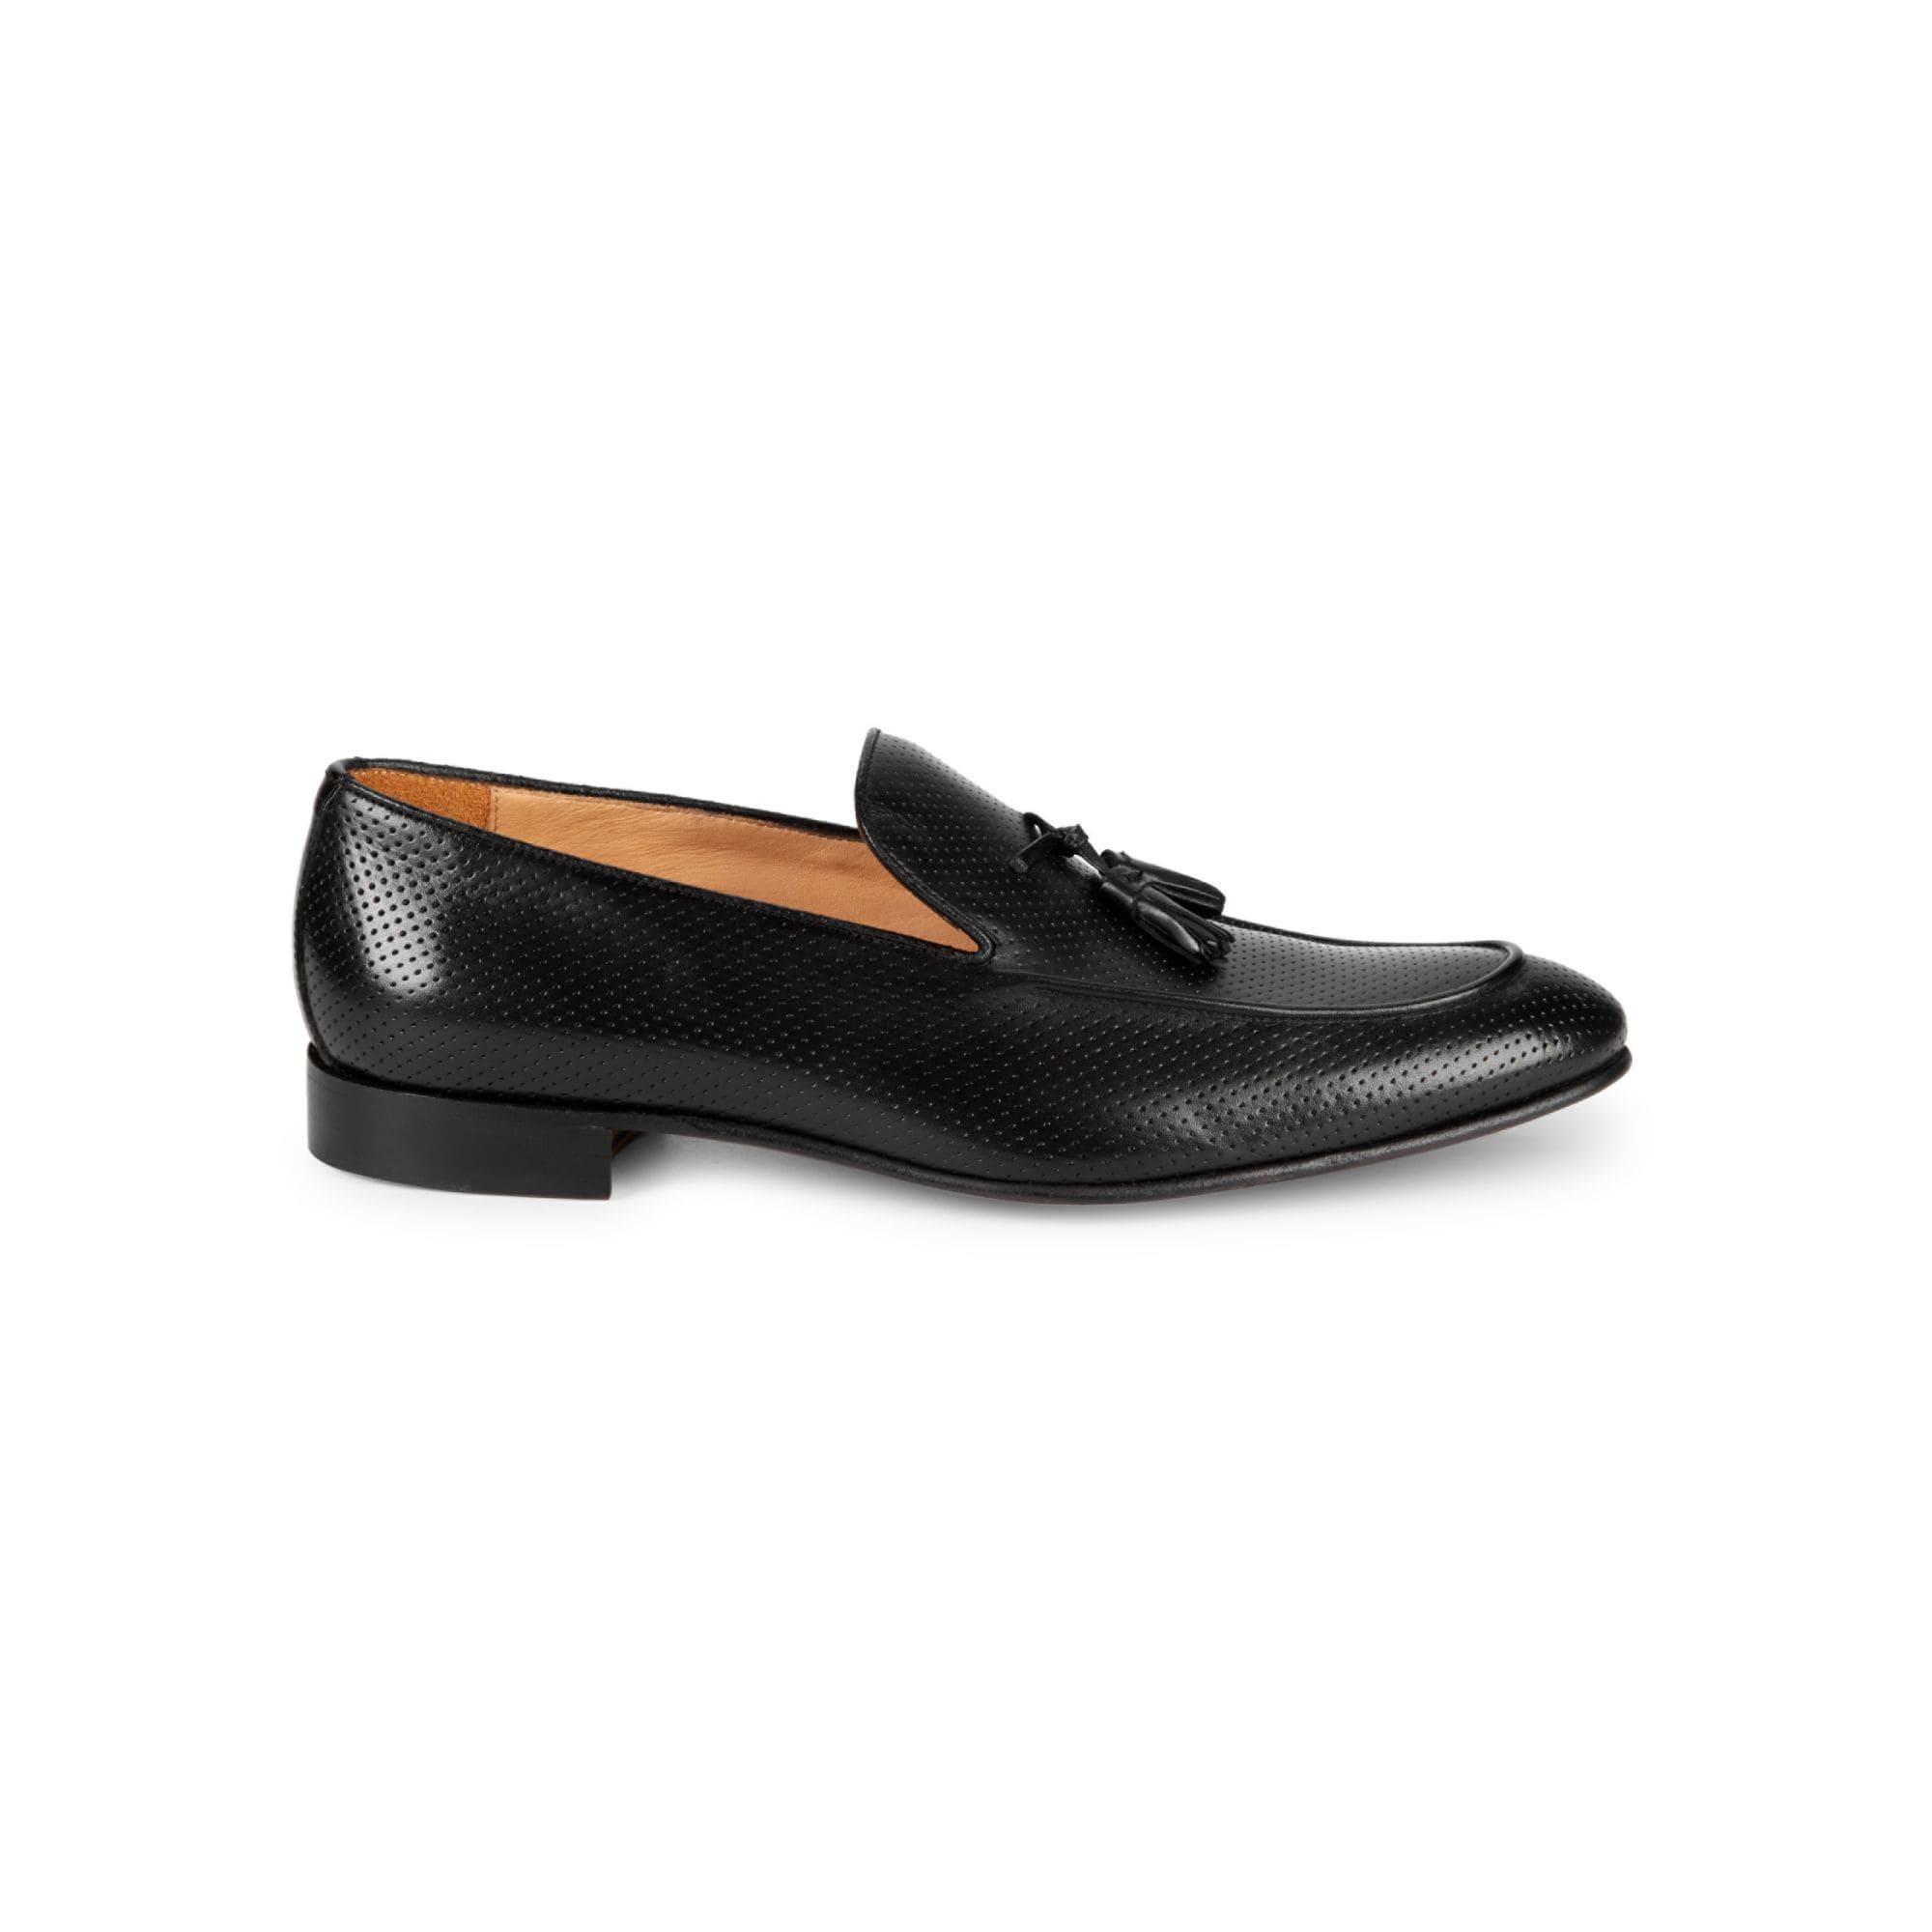 Saks Fifth Avenue Perforated Leather Tassel Loafers in Black for Men - Lyst